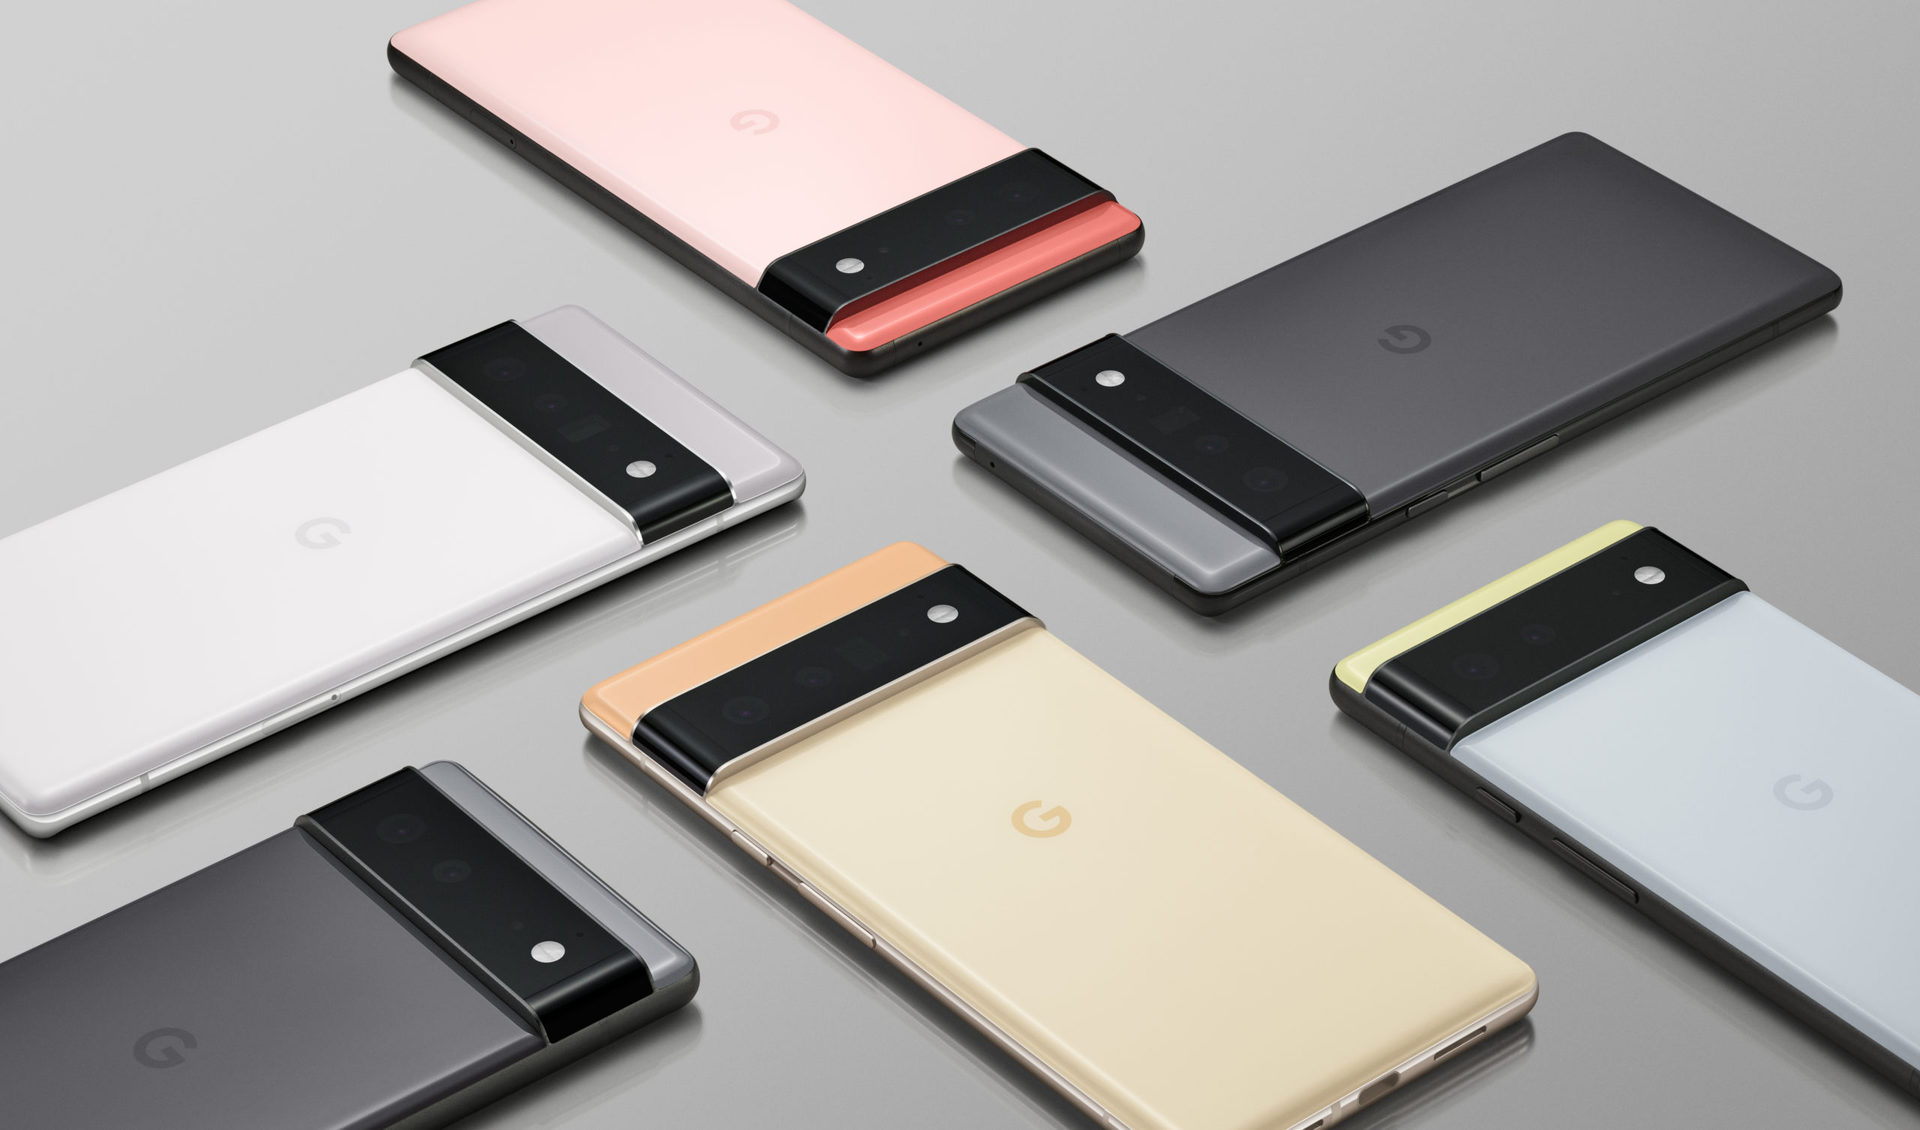 Google Pixel 6 and Pixel 6 Pro are fully unveiled